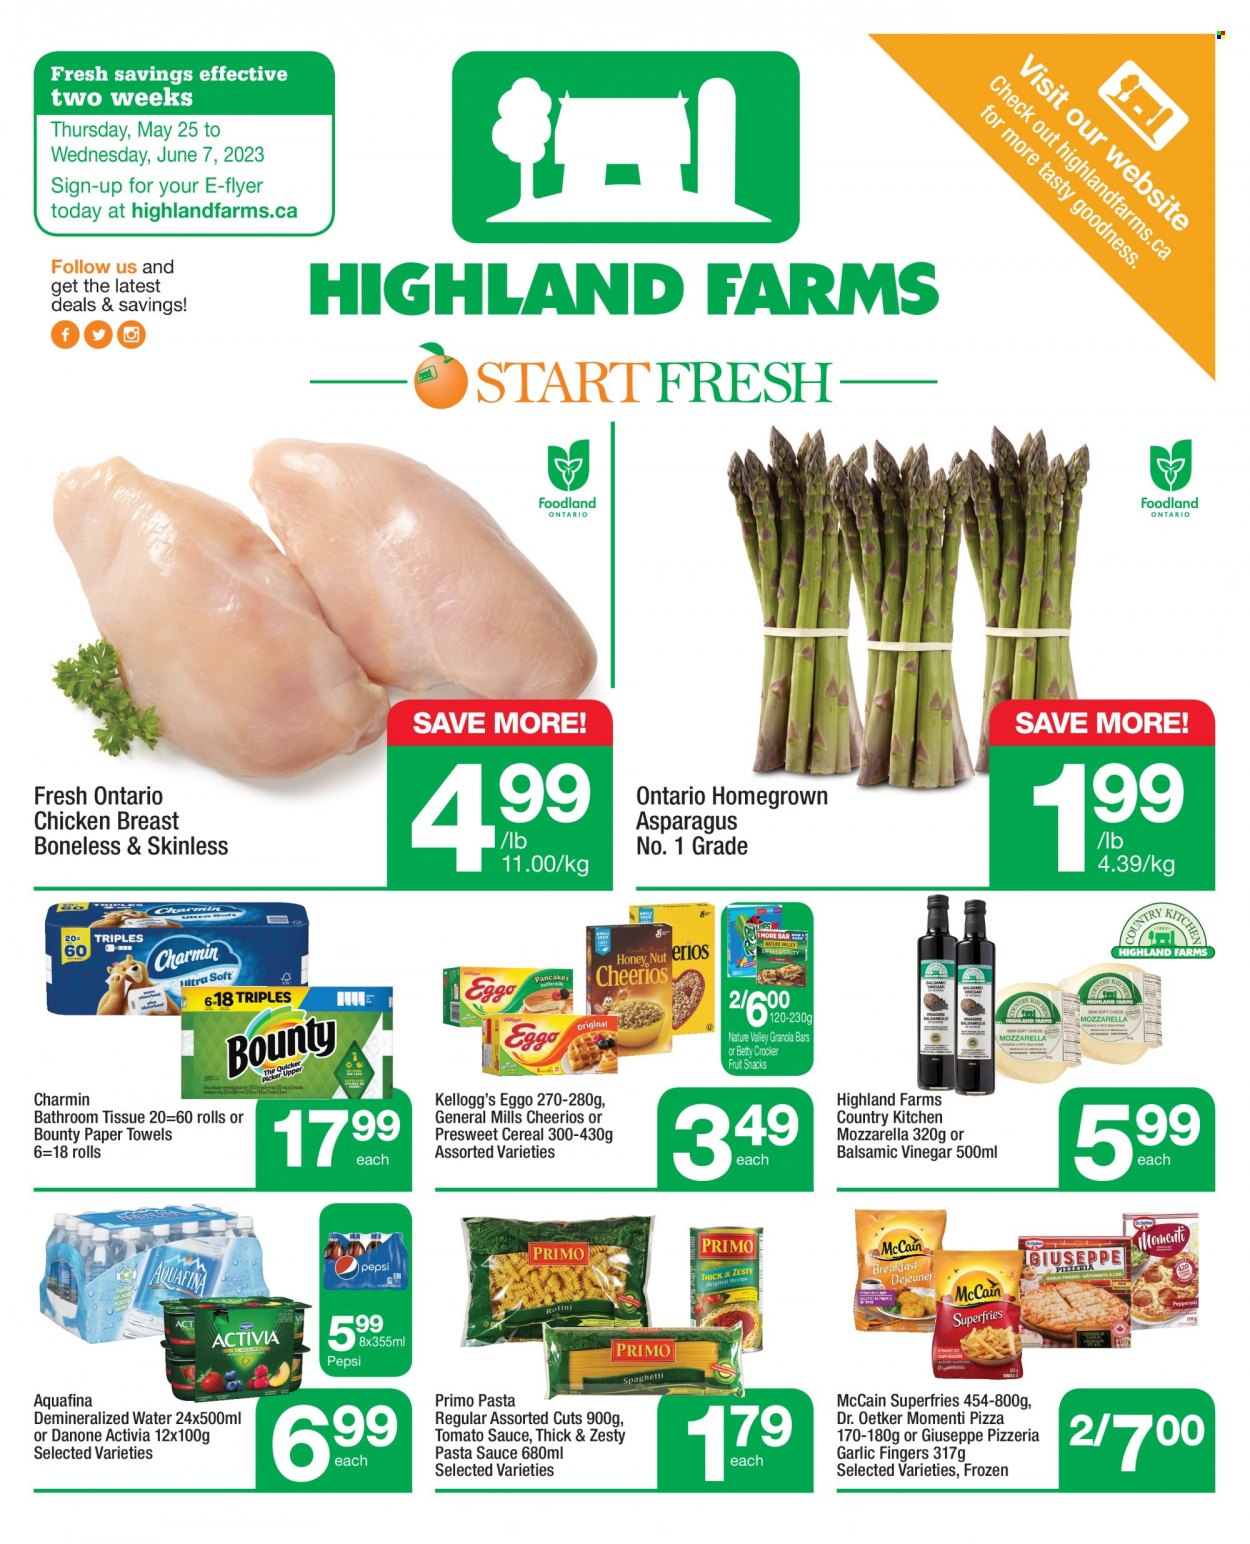 Highland Farms flyer  - May 25, 2023 - June 07, 2023.